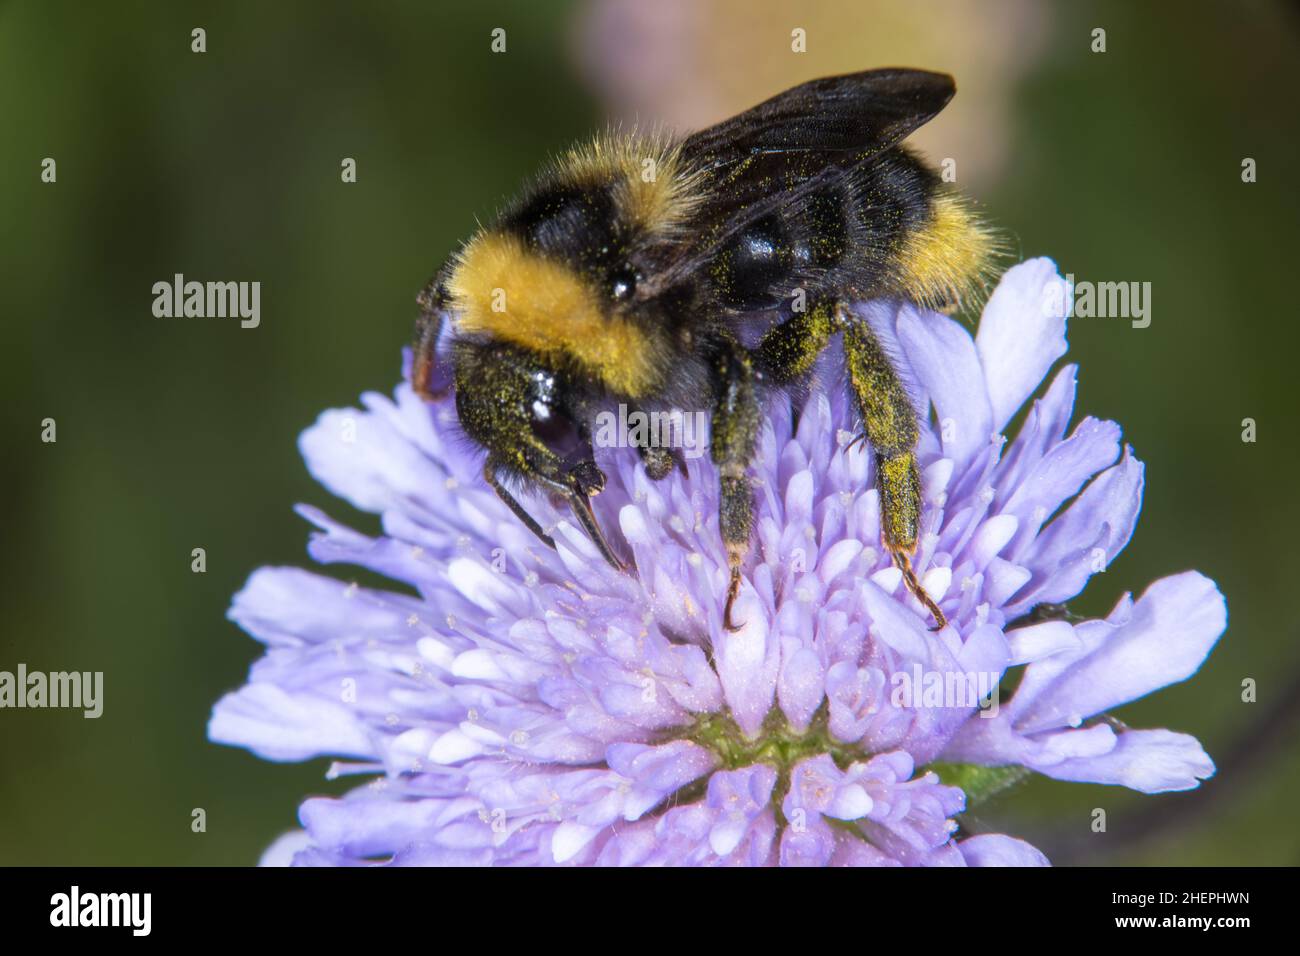 field cuckoo bumblebee (Bombus campestris, Psithyrus campestris), sits on a scabious flower, Germany Stock Photo